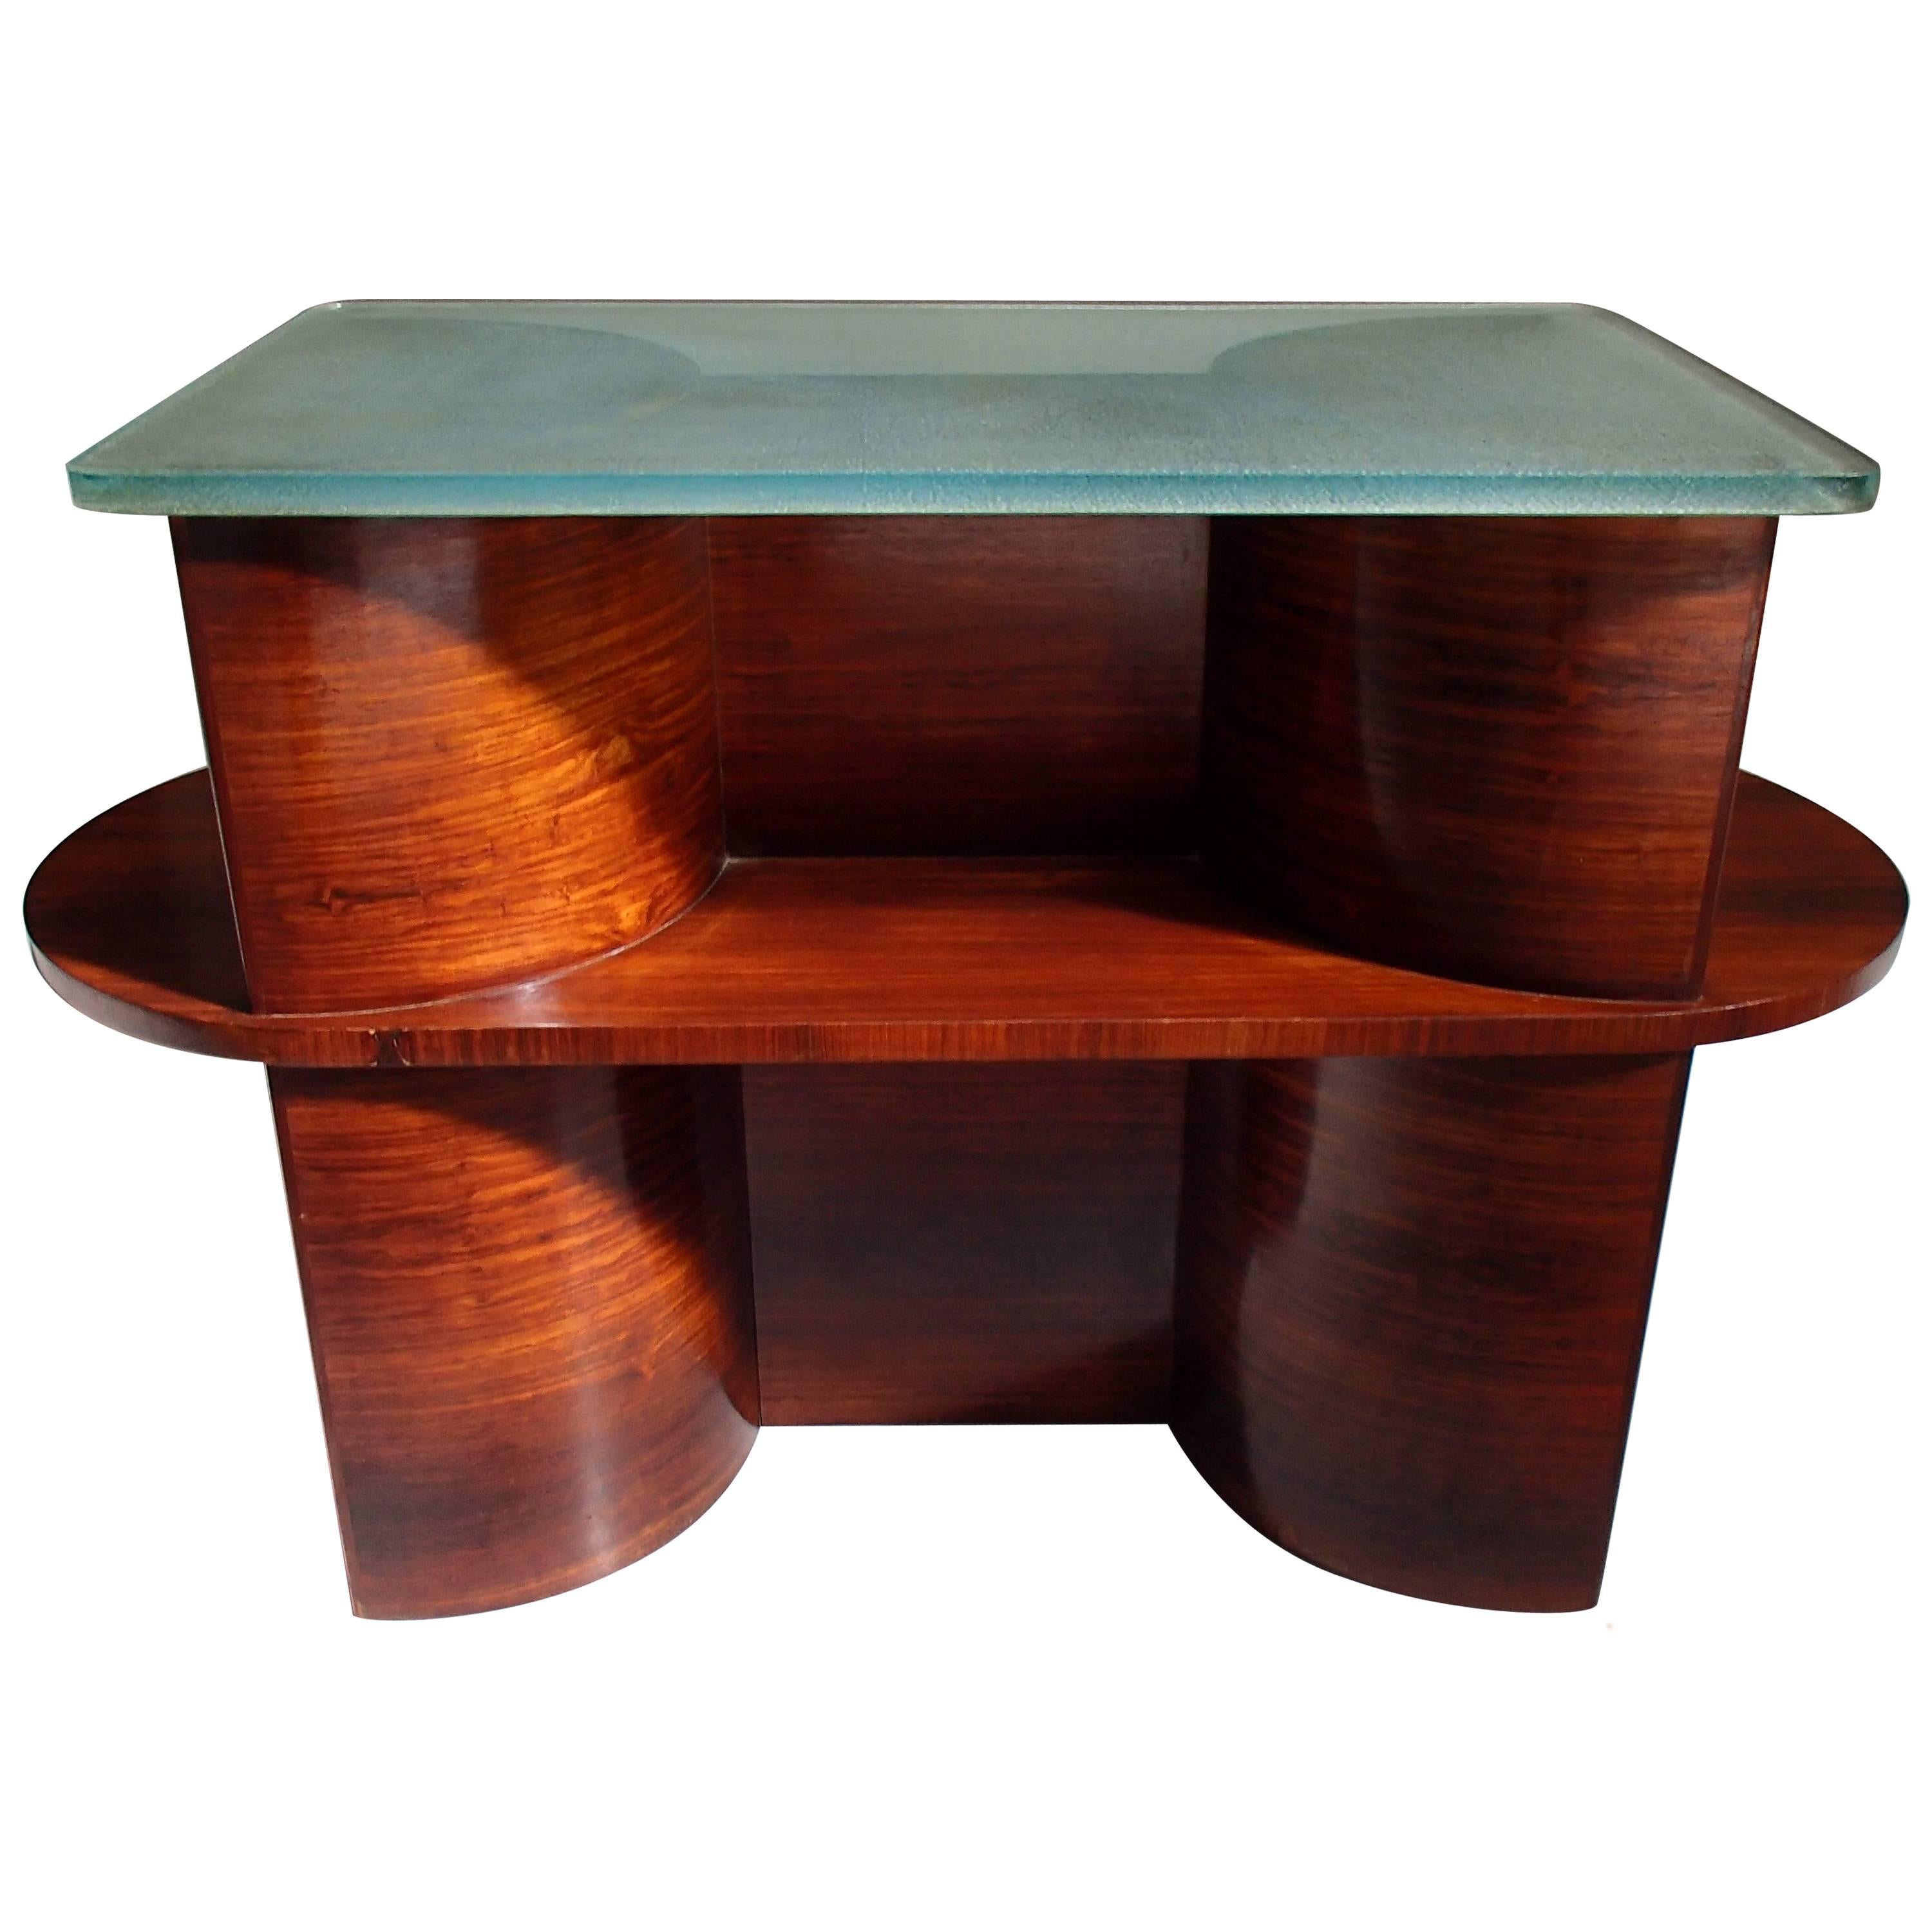 1930 Cubist Modernistic Console Table Rosewood and Thick Glass Top For Sale